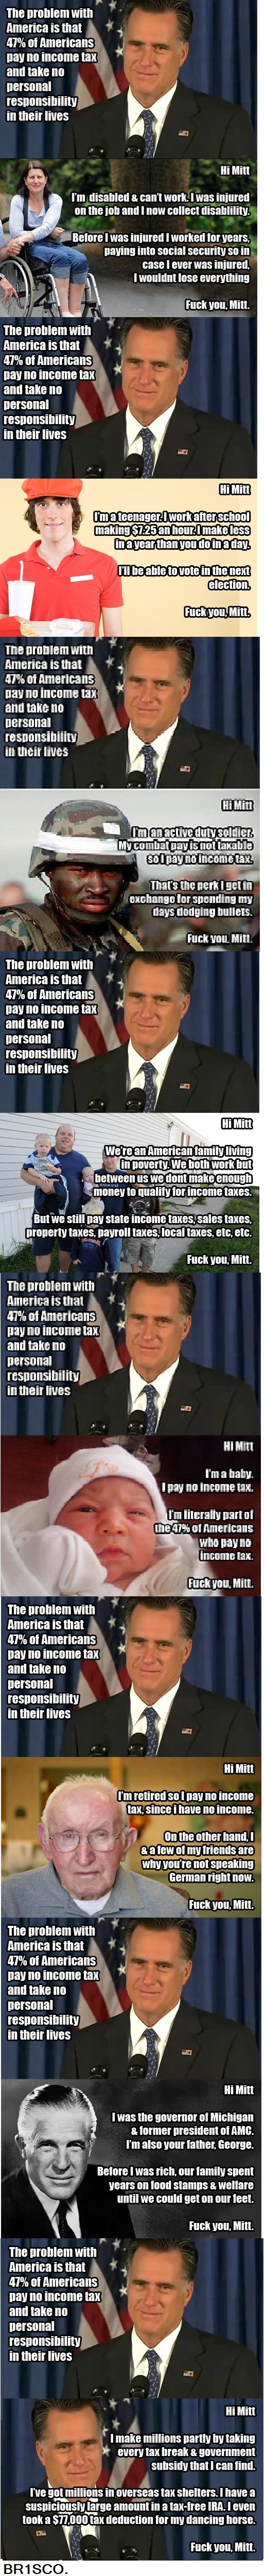 you Mitt.. Not mine, Just put them together.. The with America Is that ‘ , 41% oi Americans my on income tax and take no Mischa! in their lives hi Mitt I' m dis